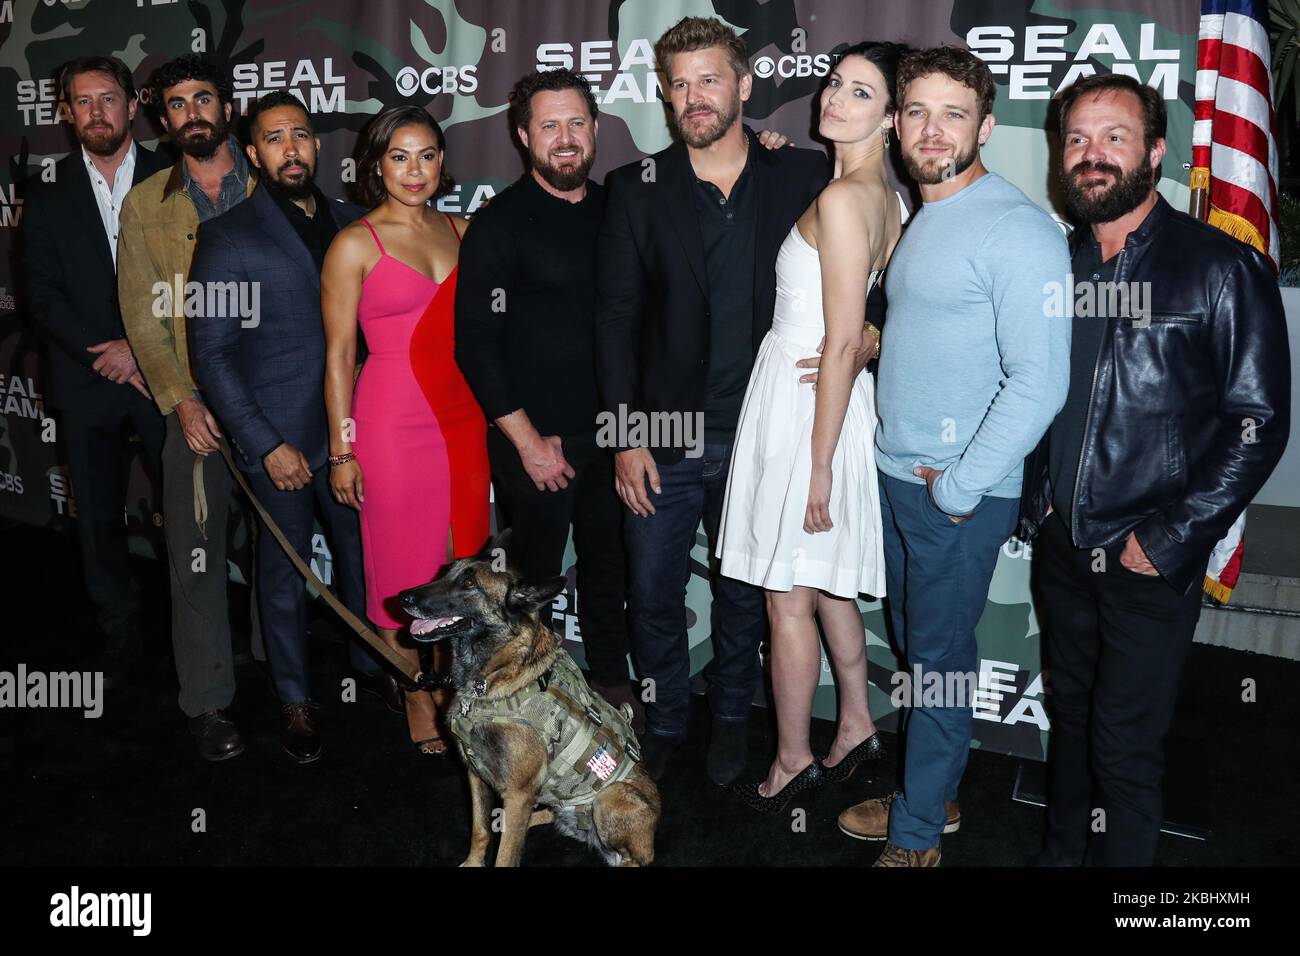 HOLLYWOOD, LOS ANGELES, CALIFORNIA, USA - FEBRUARY 25: Justin Melnick, Neil Brown Jr., Toni Trucks, AJ Buckley, David Boreanaz, Jessica Pare, Max Thieriot and Judd Lormand arrive at the Los Angeles Premiere Of CBS Television Studios' 'SEAL Team' held at ArcLight Cinemas Hollywood on February 25, 2020 in Hollywood, Los Angeles, California, United States. (Photo by Xavier Collin/Image Press Agency/NurPhoto) Stock Photo